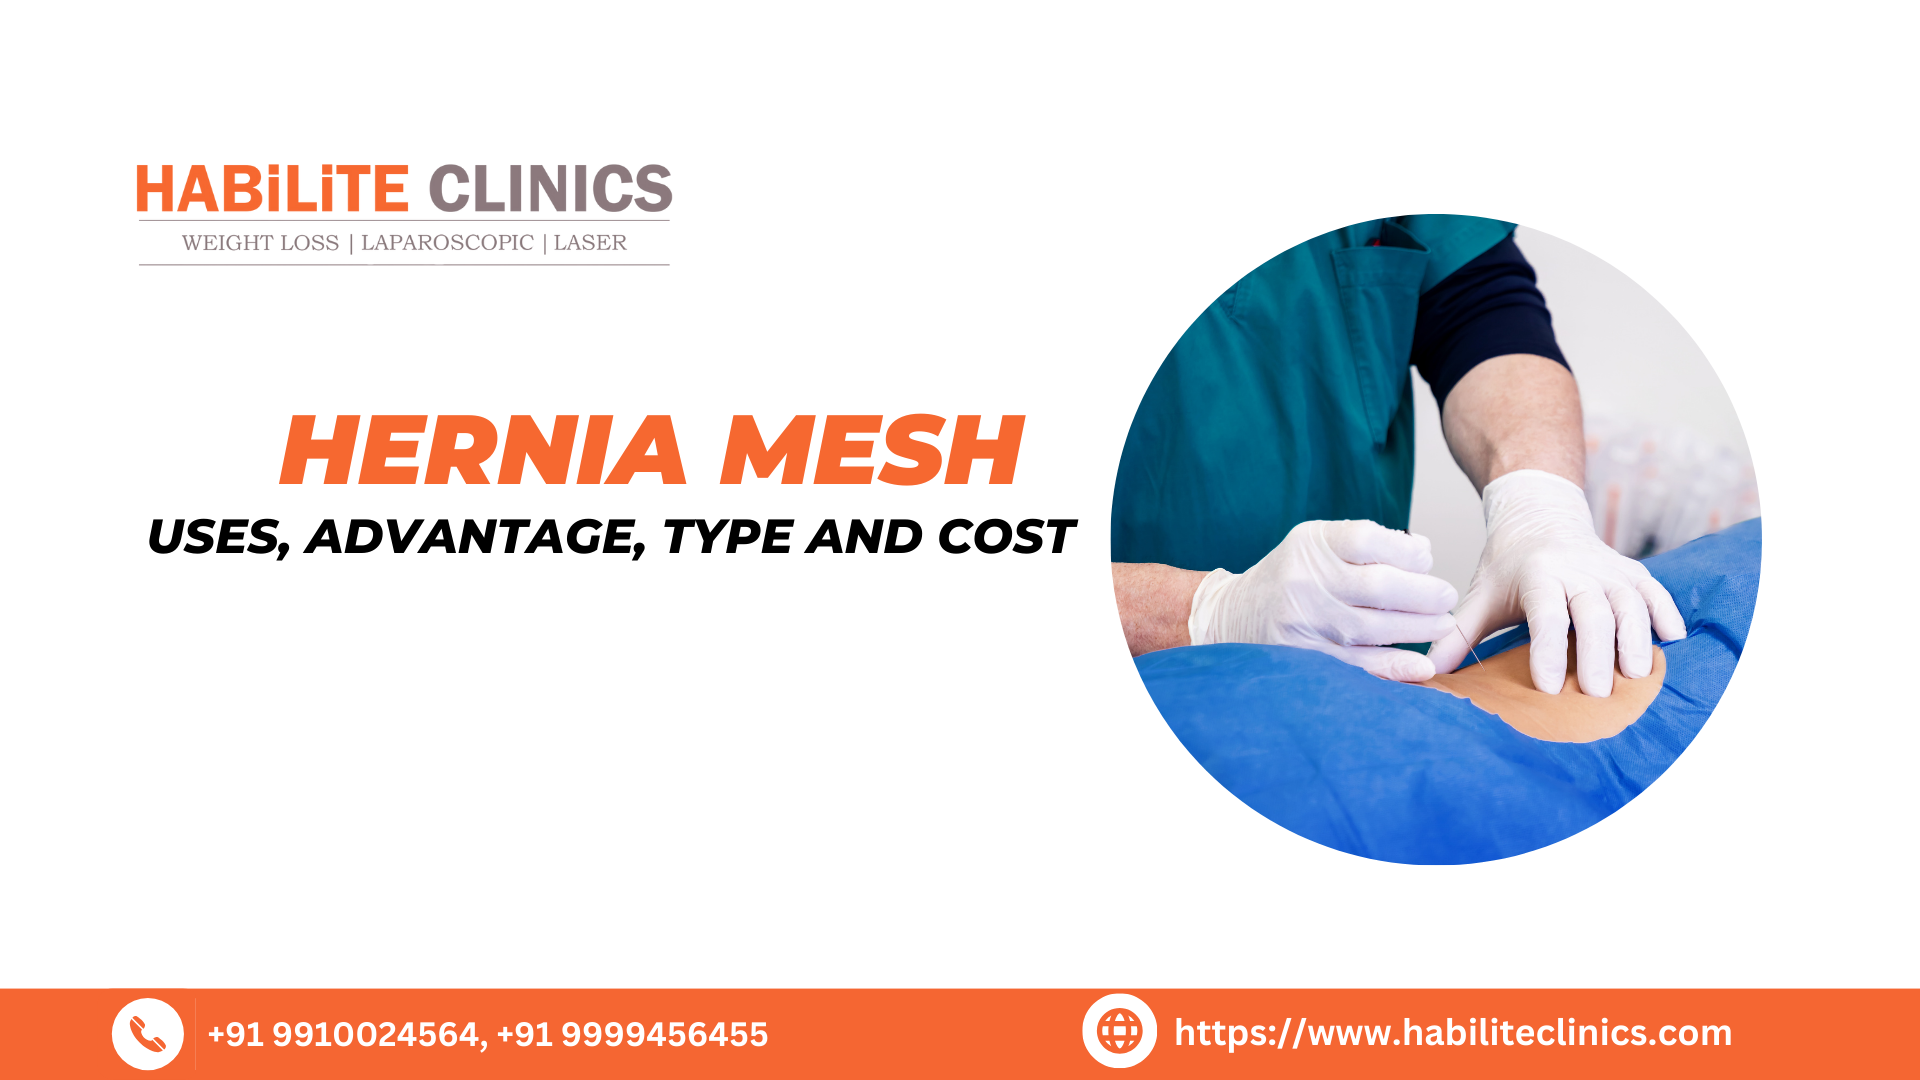 Hernia Mesh: Uses, Advantage, Type and Cost